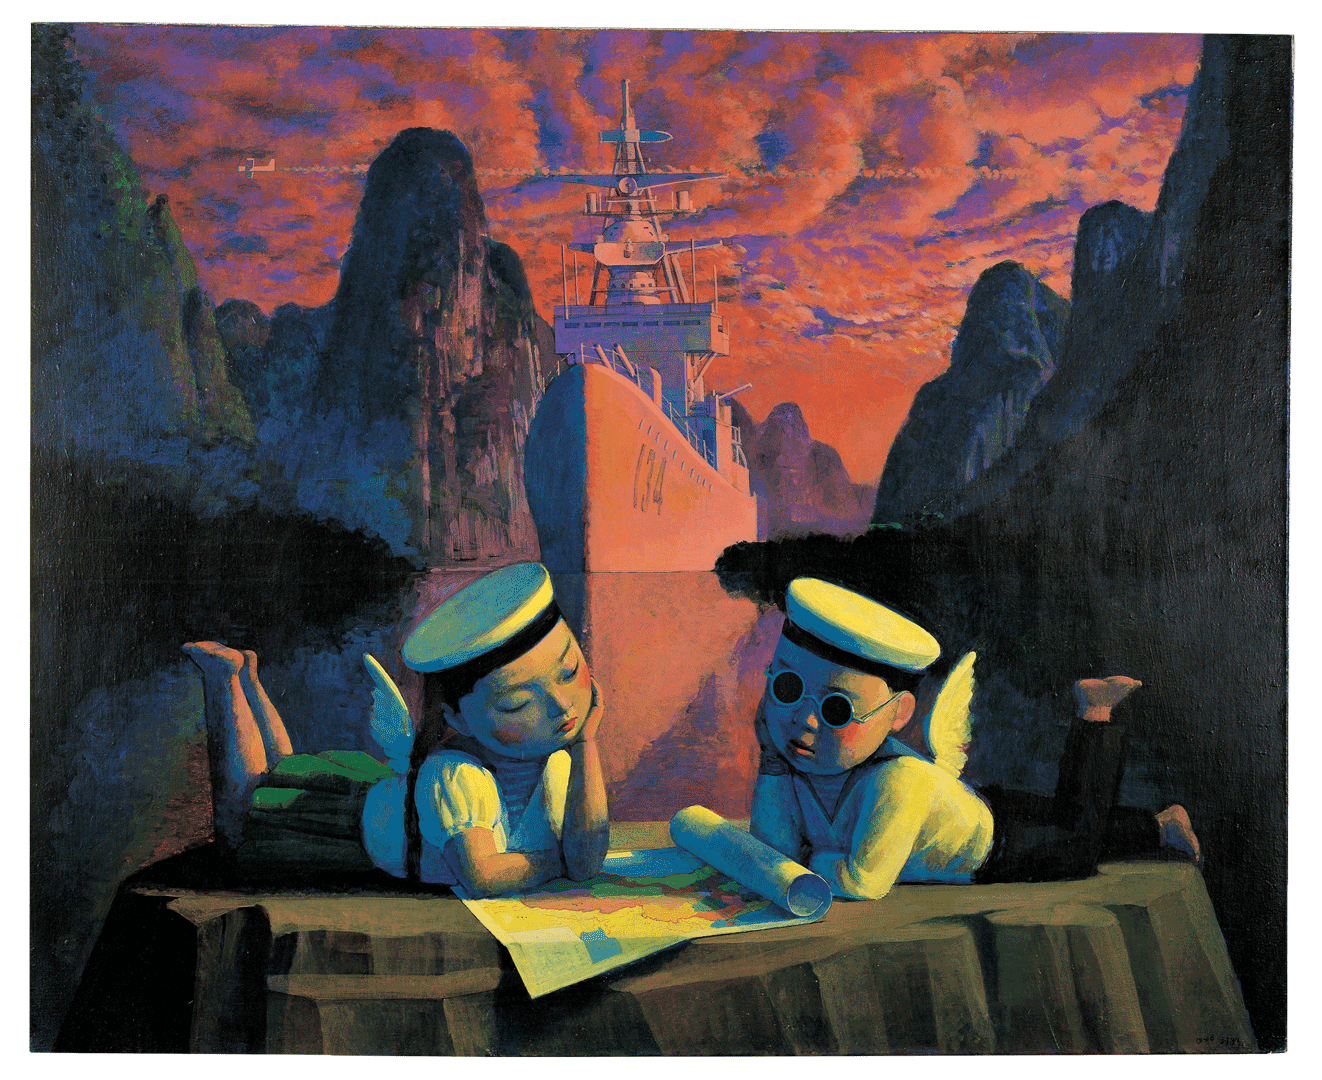 A painting by Liu Ye, titled Warship Children, dated 1996.